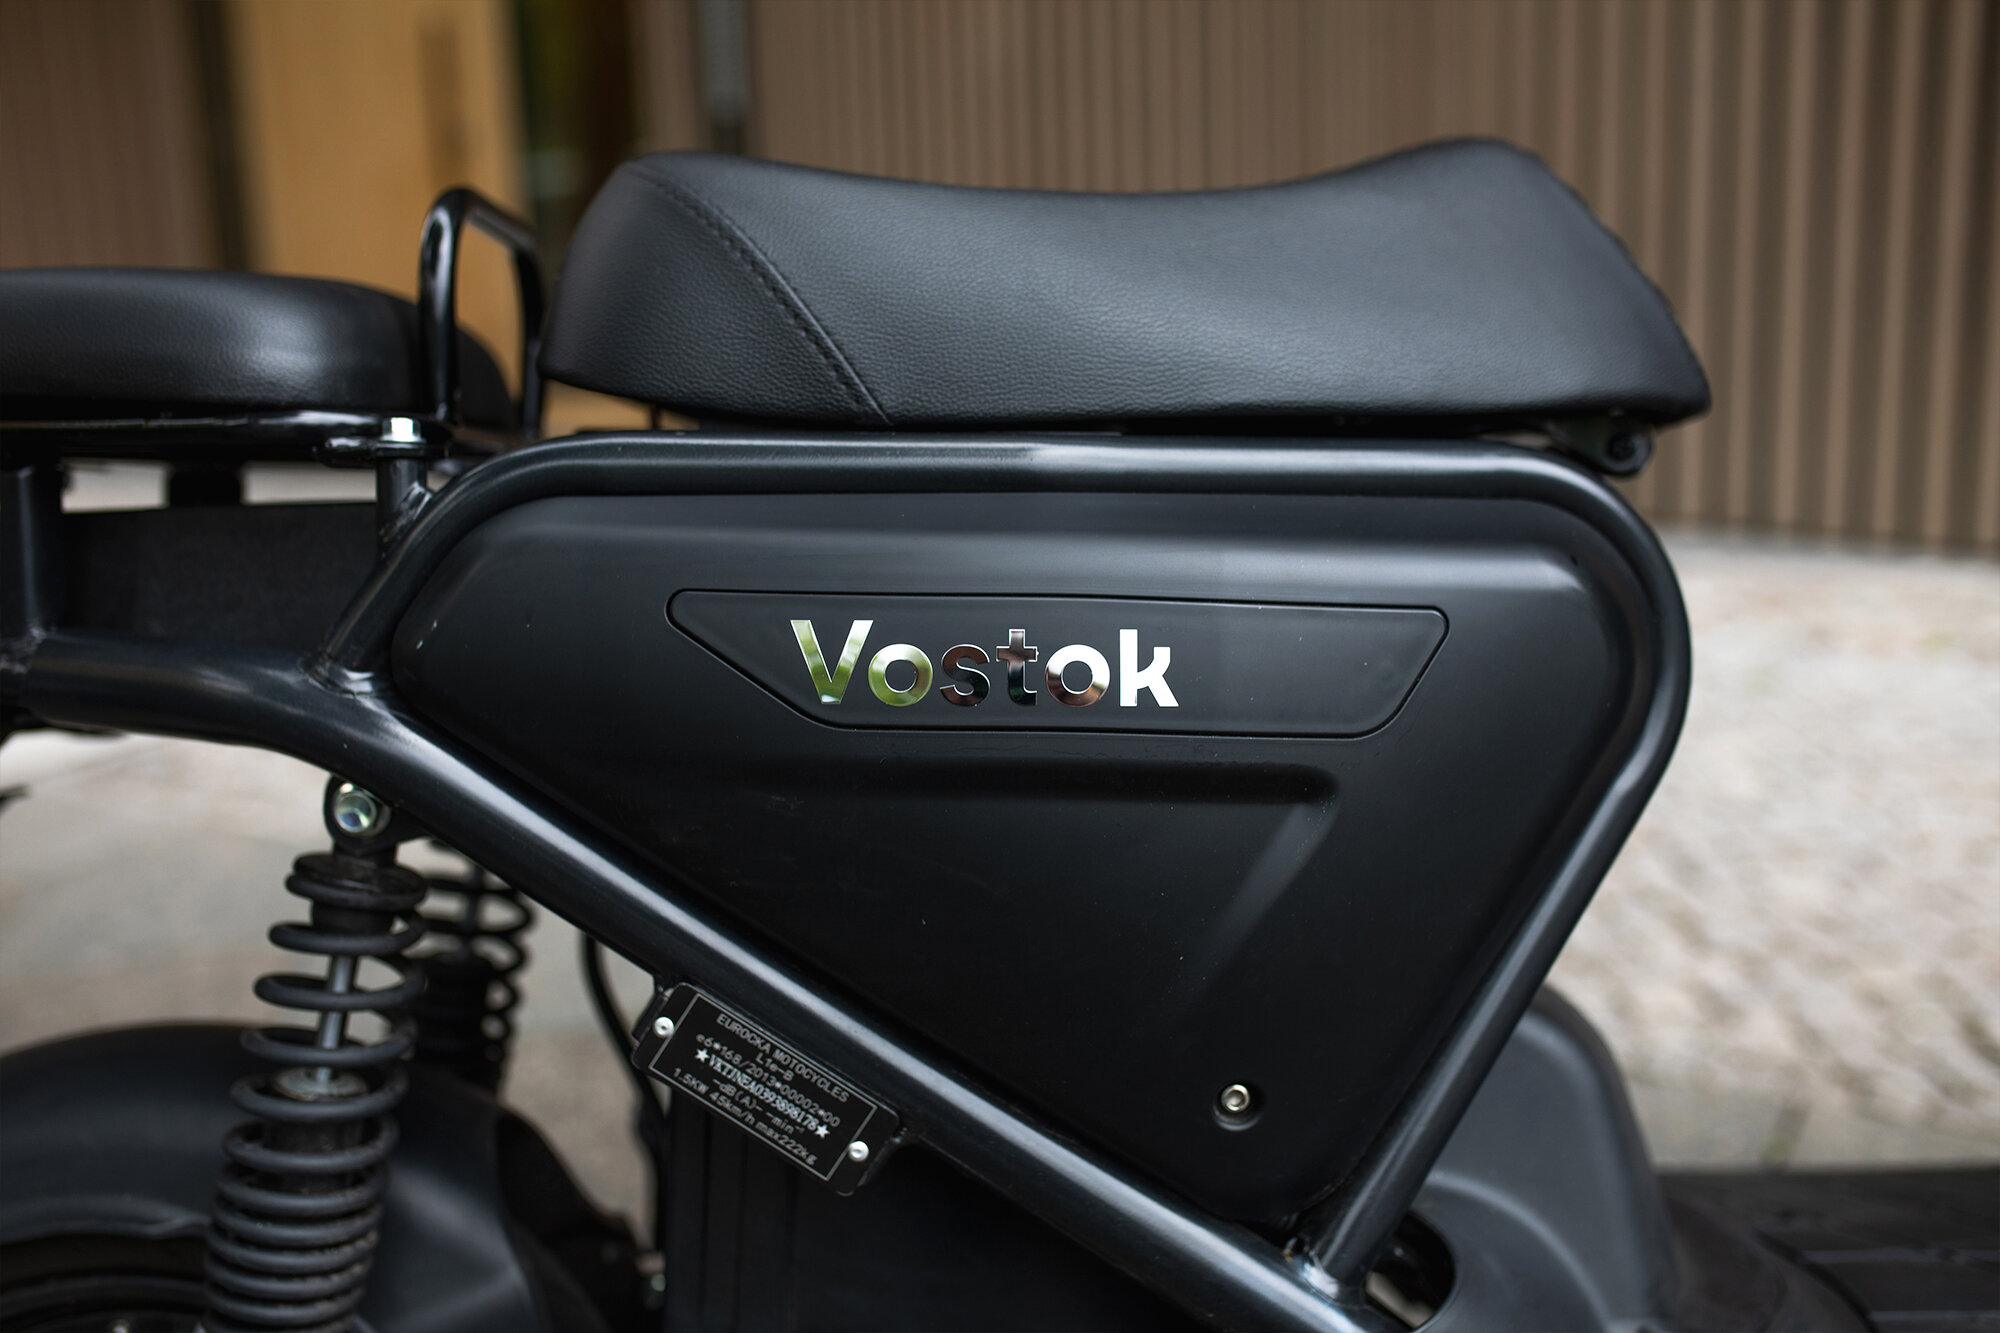 The electric scooter from Vostok